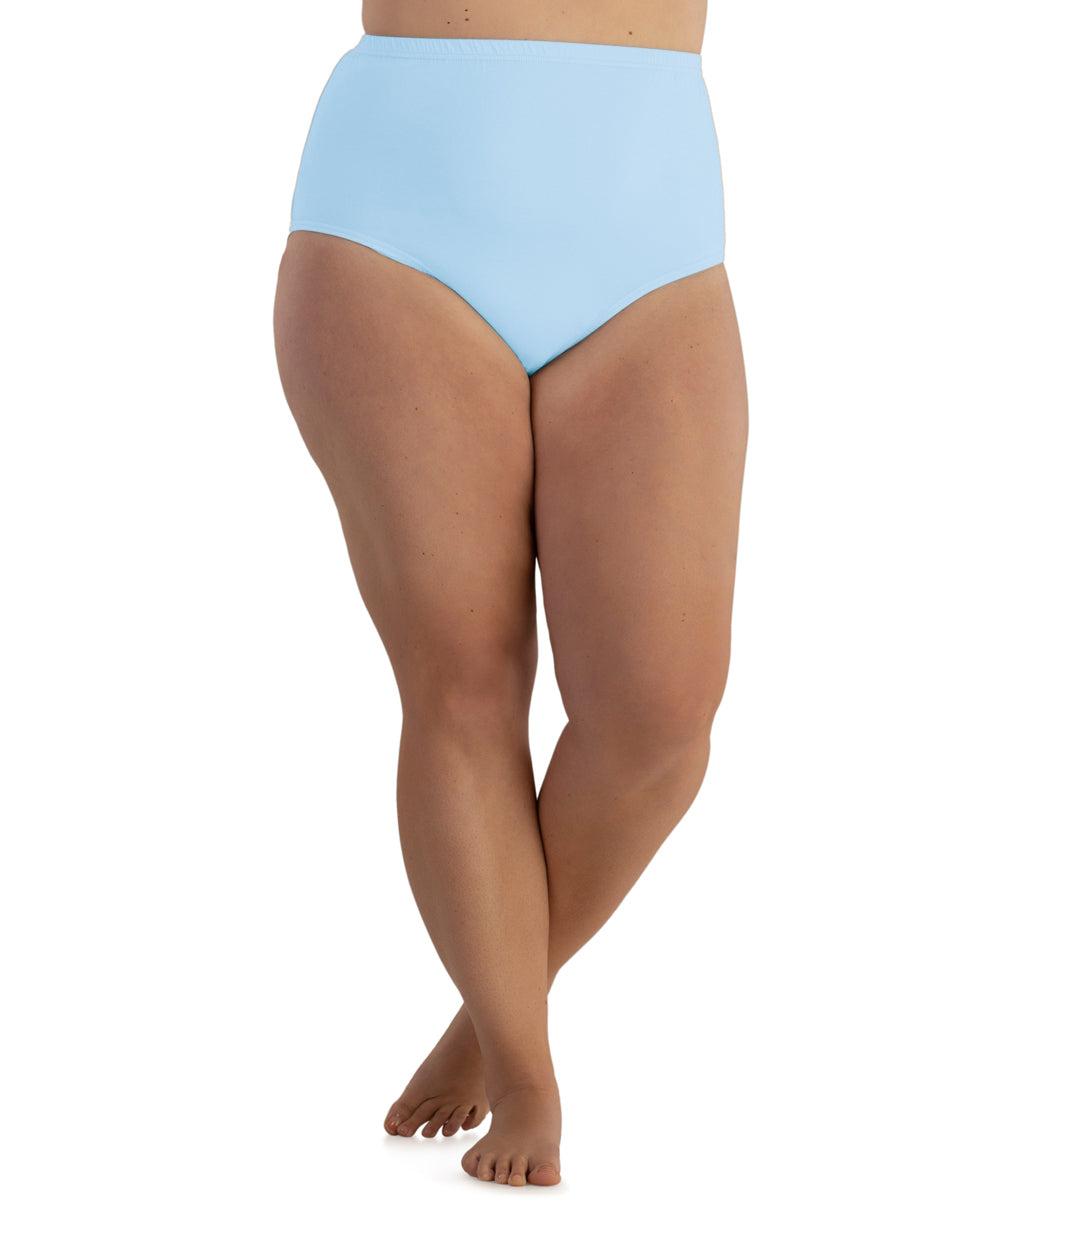 Bottom half of plus sized woman, facing front, wearing JunoActive Junowear Cotton Stretch Classic Full Fit Brief in bluebell. This brief has a high waist fit with conservative leg opening.